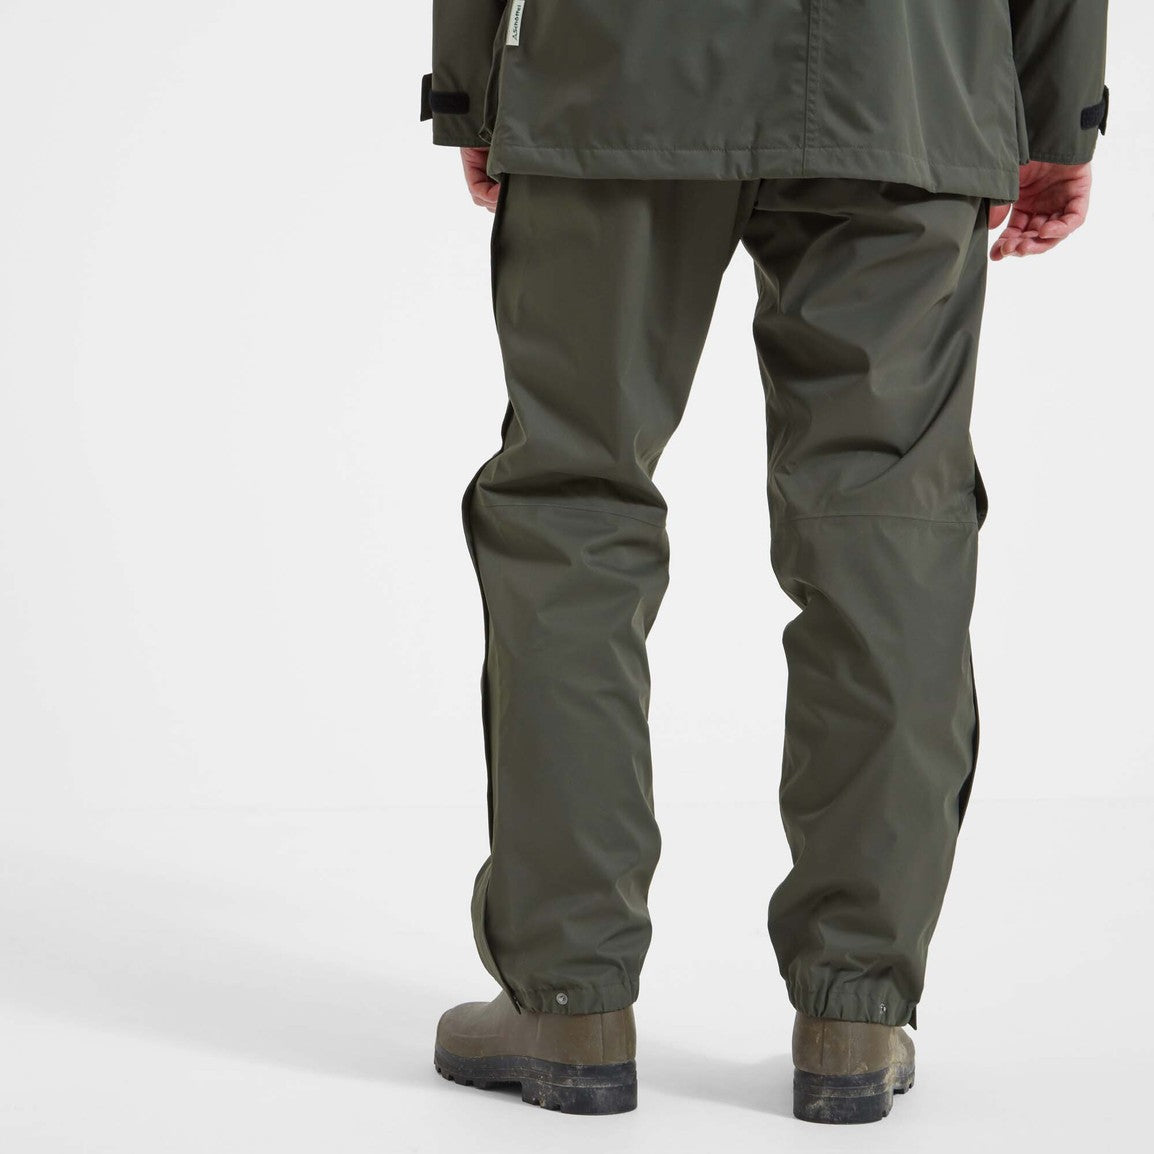 Schoffel Mens Saxby Overtrousers II Tundra